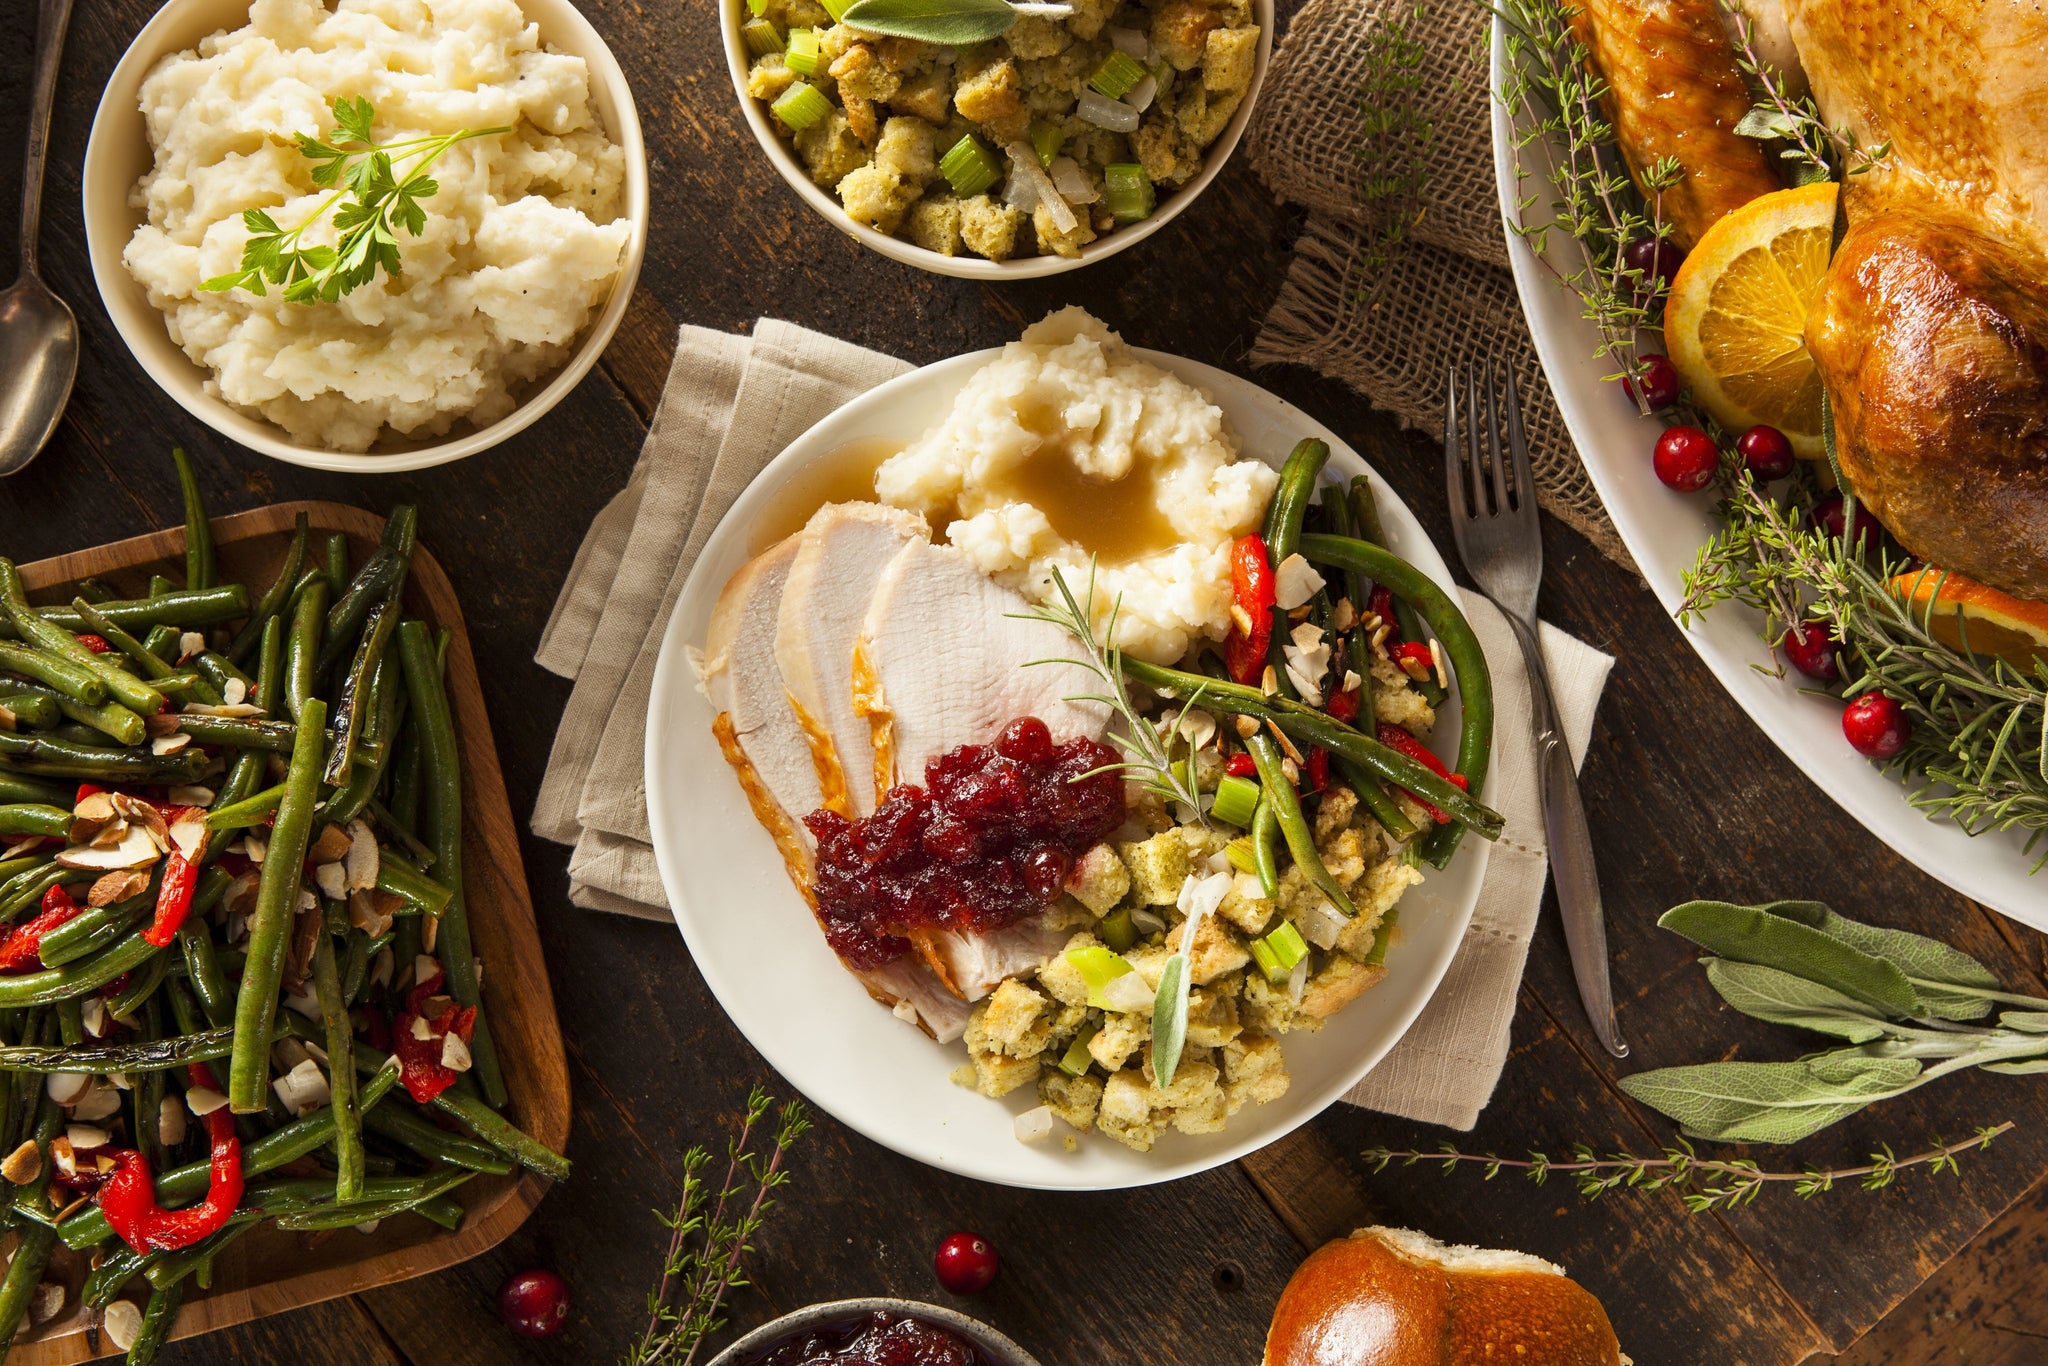 Holiday Nutrition for Men: 4 Tips to Eating Healthy While Enjoying Your Holiday Favorites